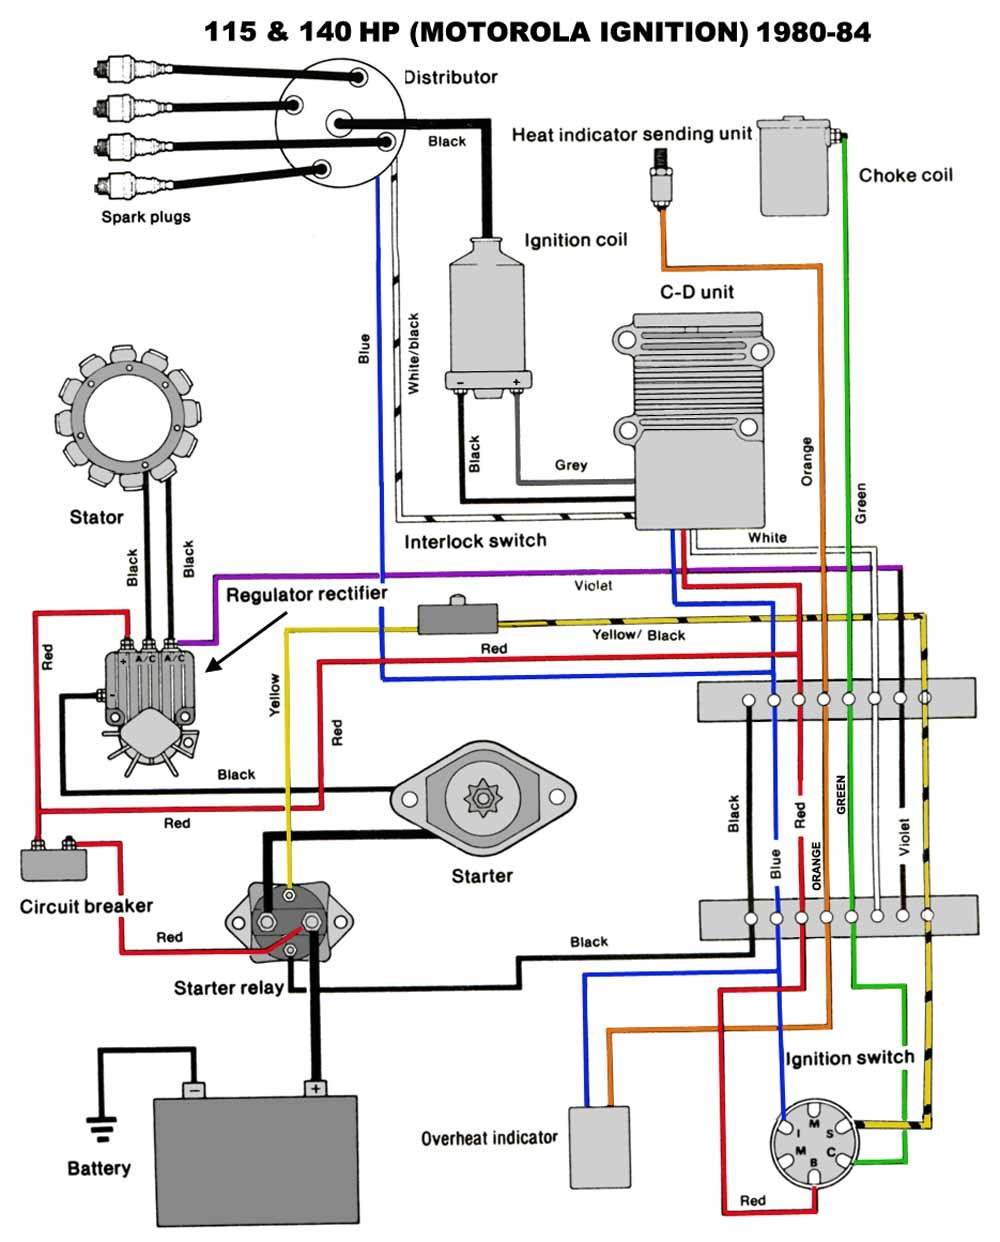 Wiring Diagram For Yamaha 115 Outboard - Wiring Diagrams - Yamaha Outboard Wiring Diagram Pdf